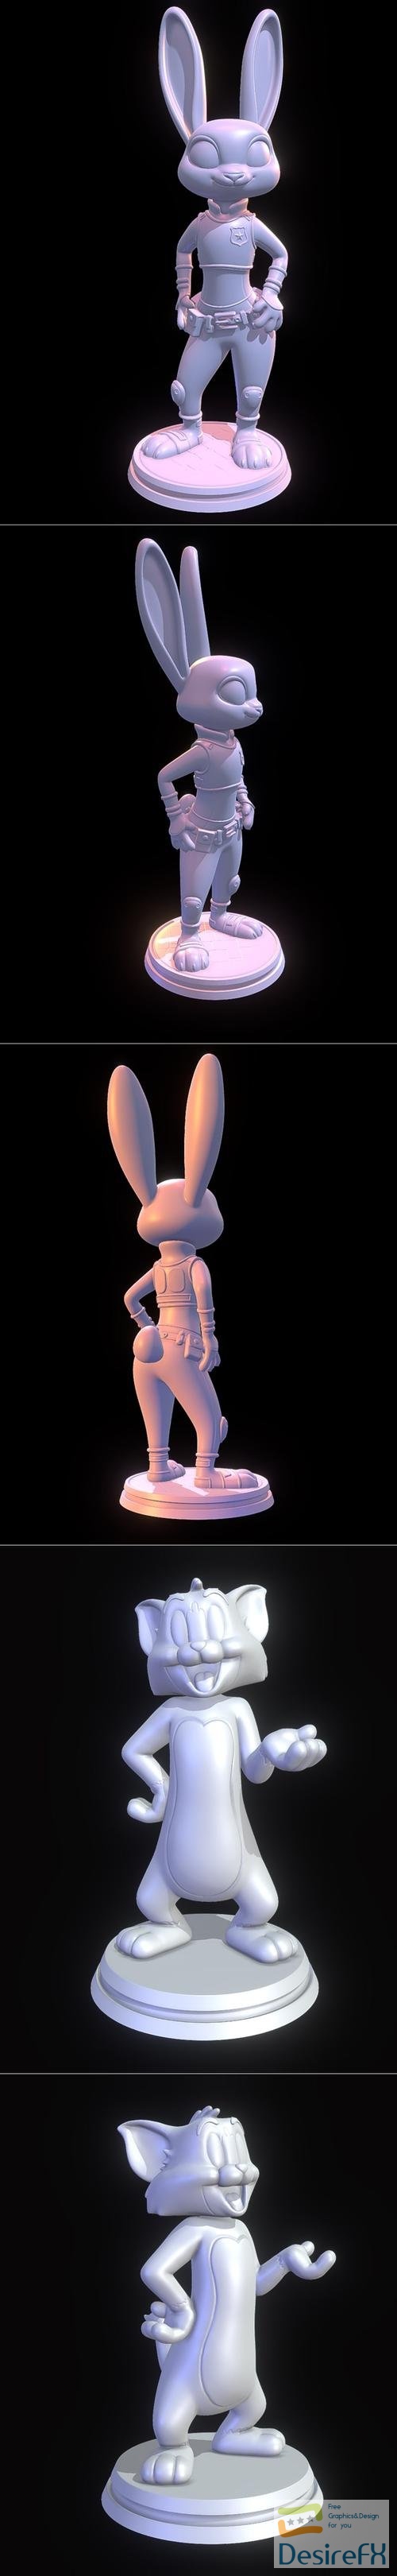 Judy Hopps - Zootopia and Tom - Tom and Jerry – 3D Print